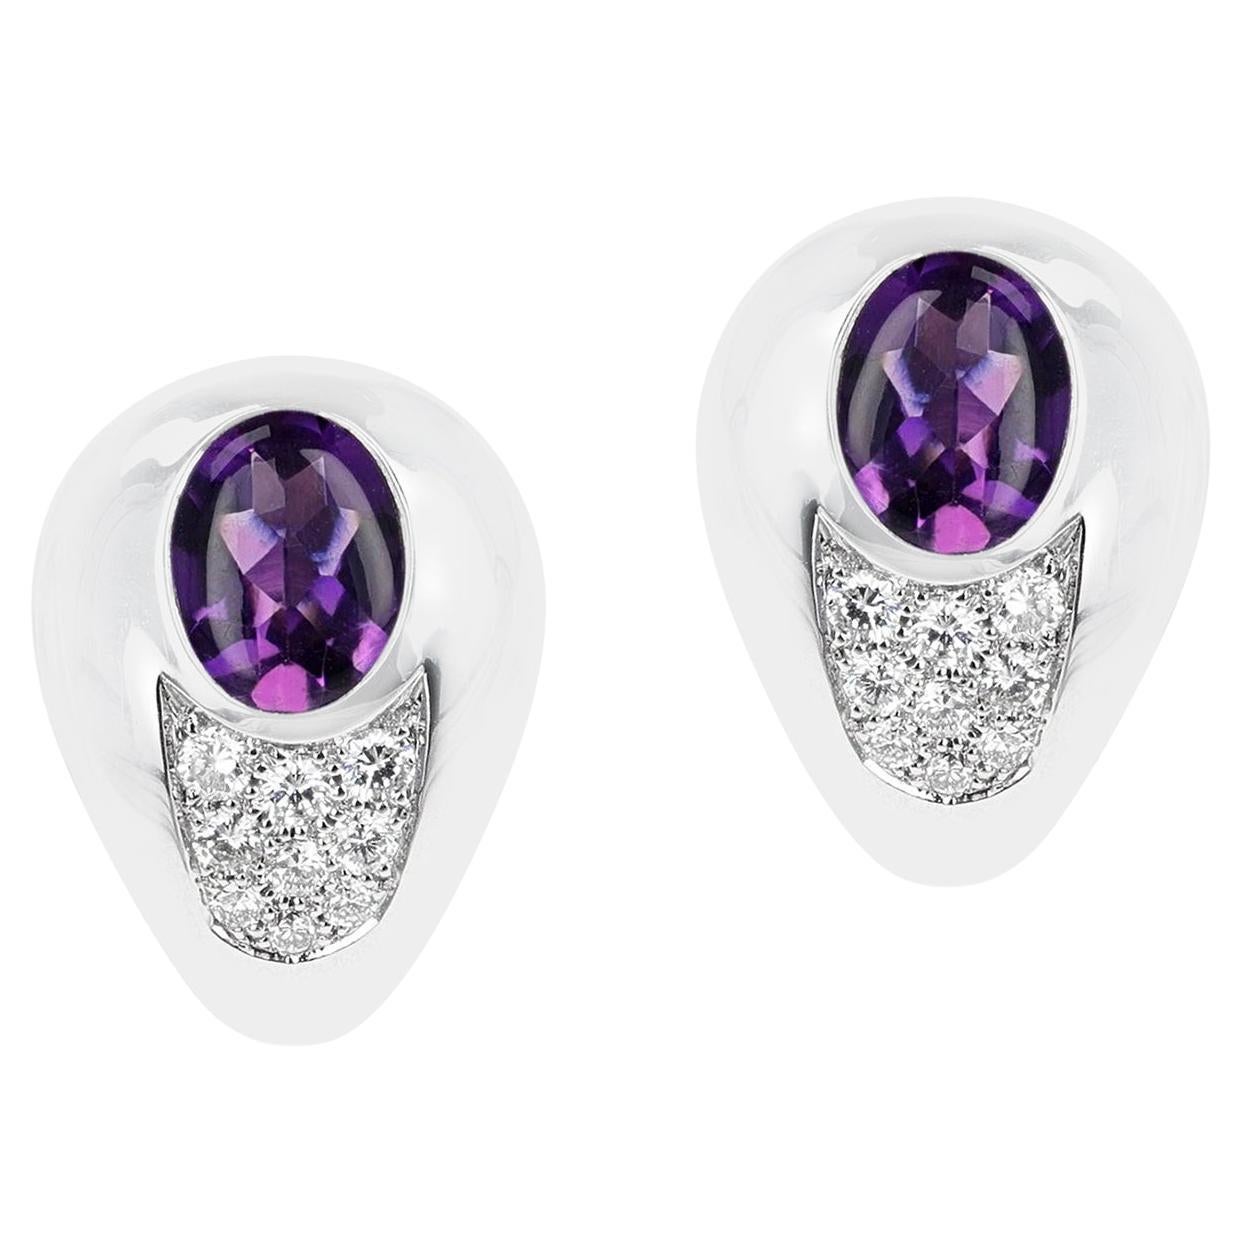 Mauboussin 2.20 ct. Amethyst and 0.42 ct. Diamond Earrings, 18K Gold For Sale